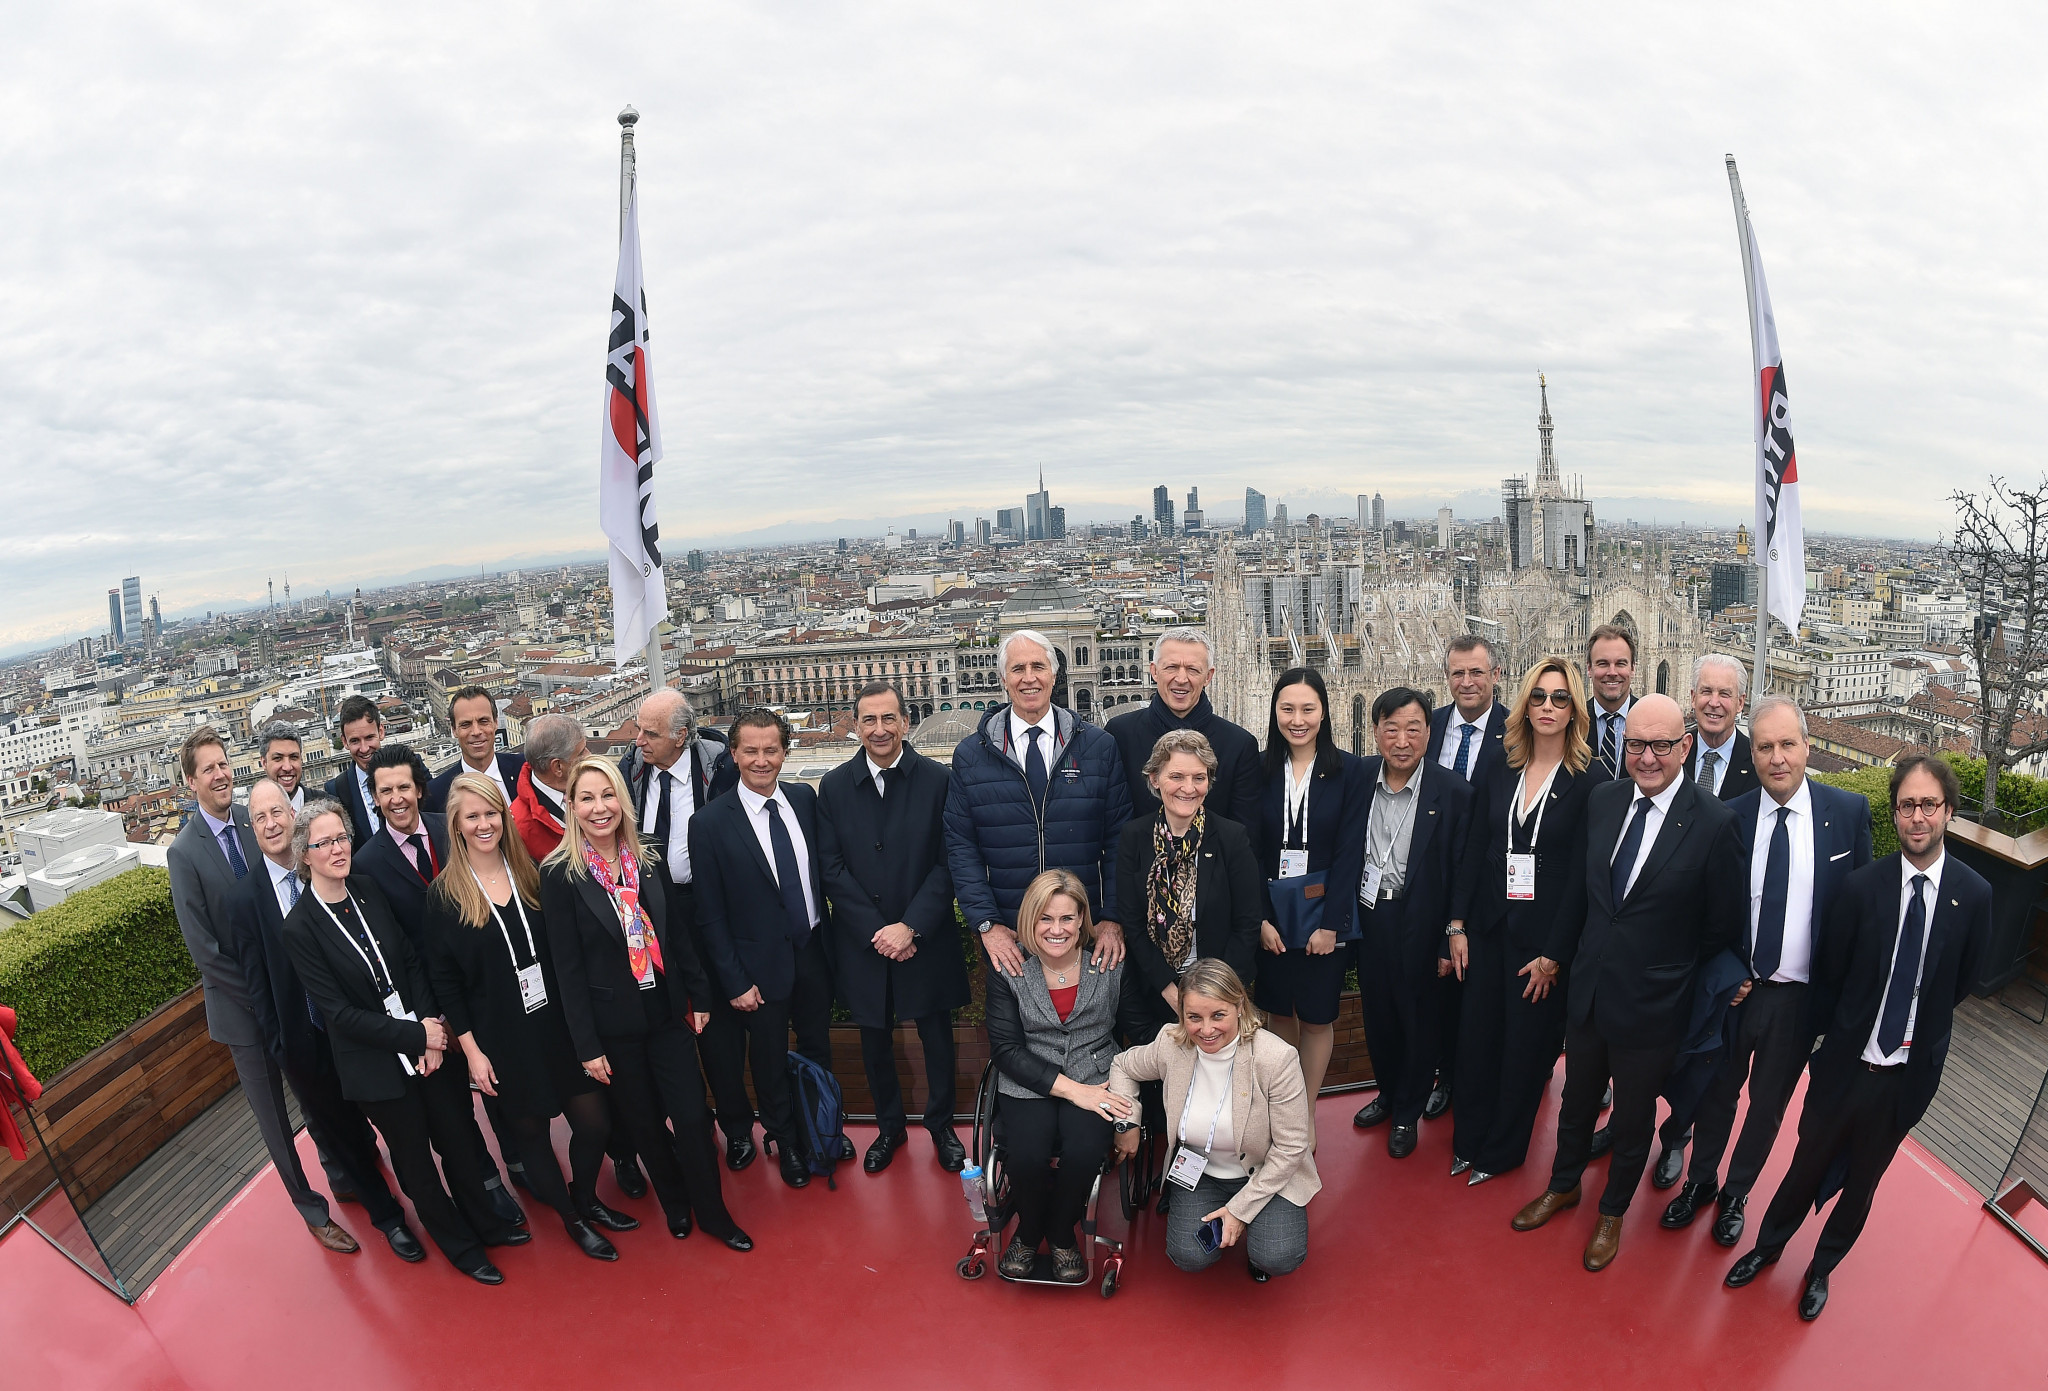 The beauty of Milan was on show as the IOC Evaluation Commission and top Milan Cortina 2026 officials posed for a souvenir photograph ©Milan Cortina 2026